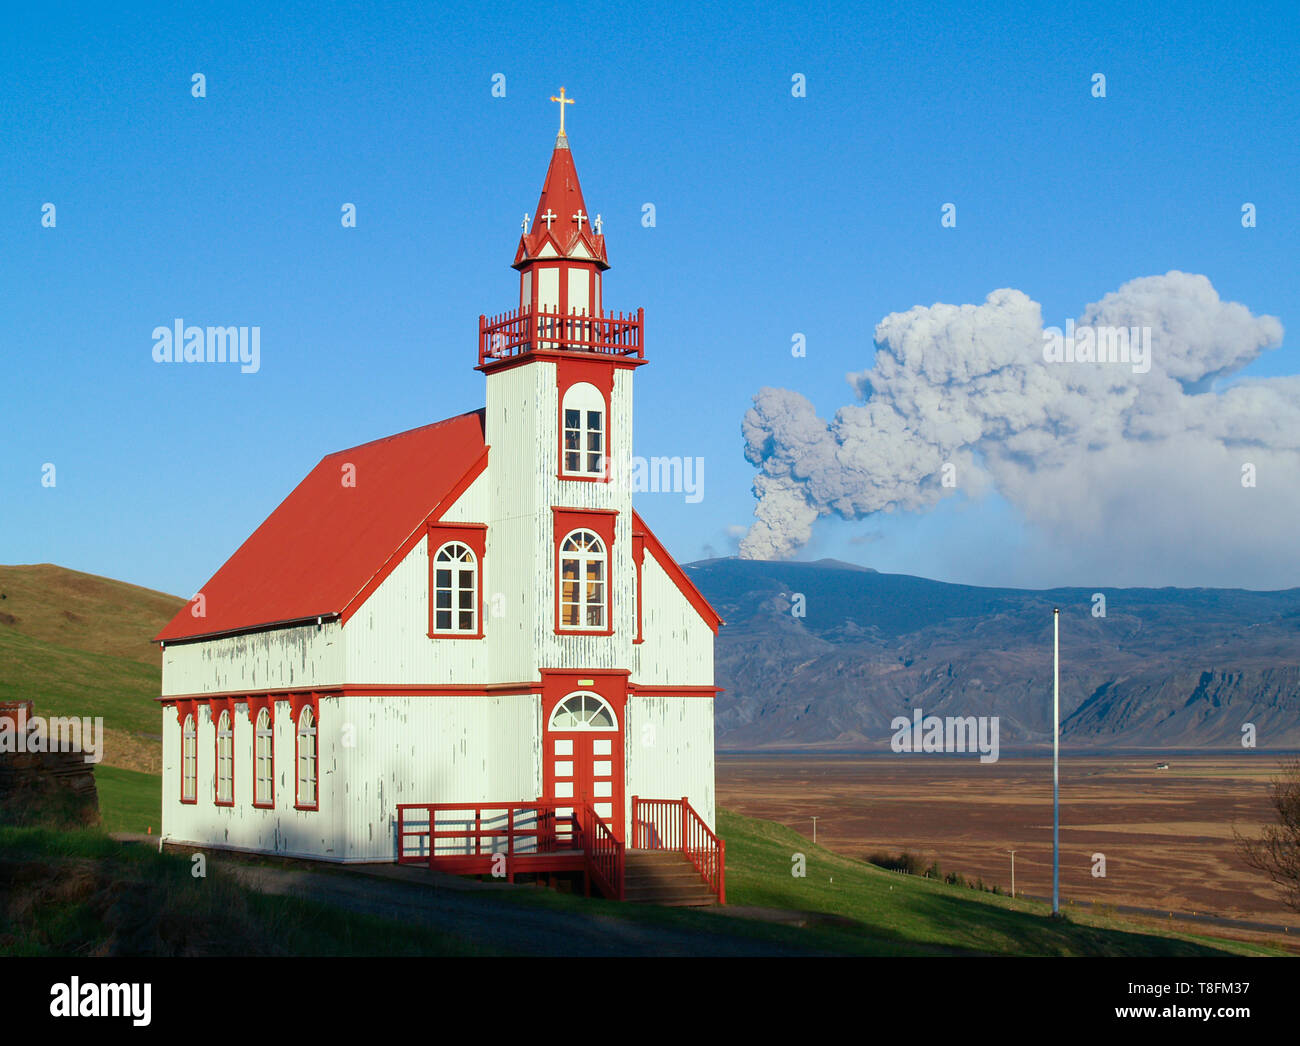 Volcanic eruption with church in foreground. Hlidarendi church and Eyjafjallajokull glacier and vocano. Stock Photo